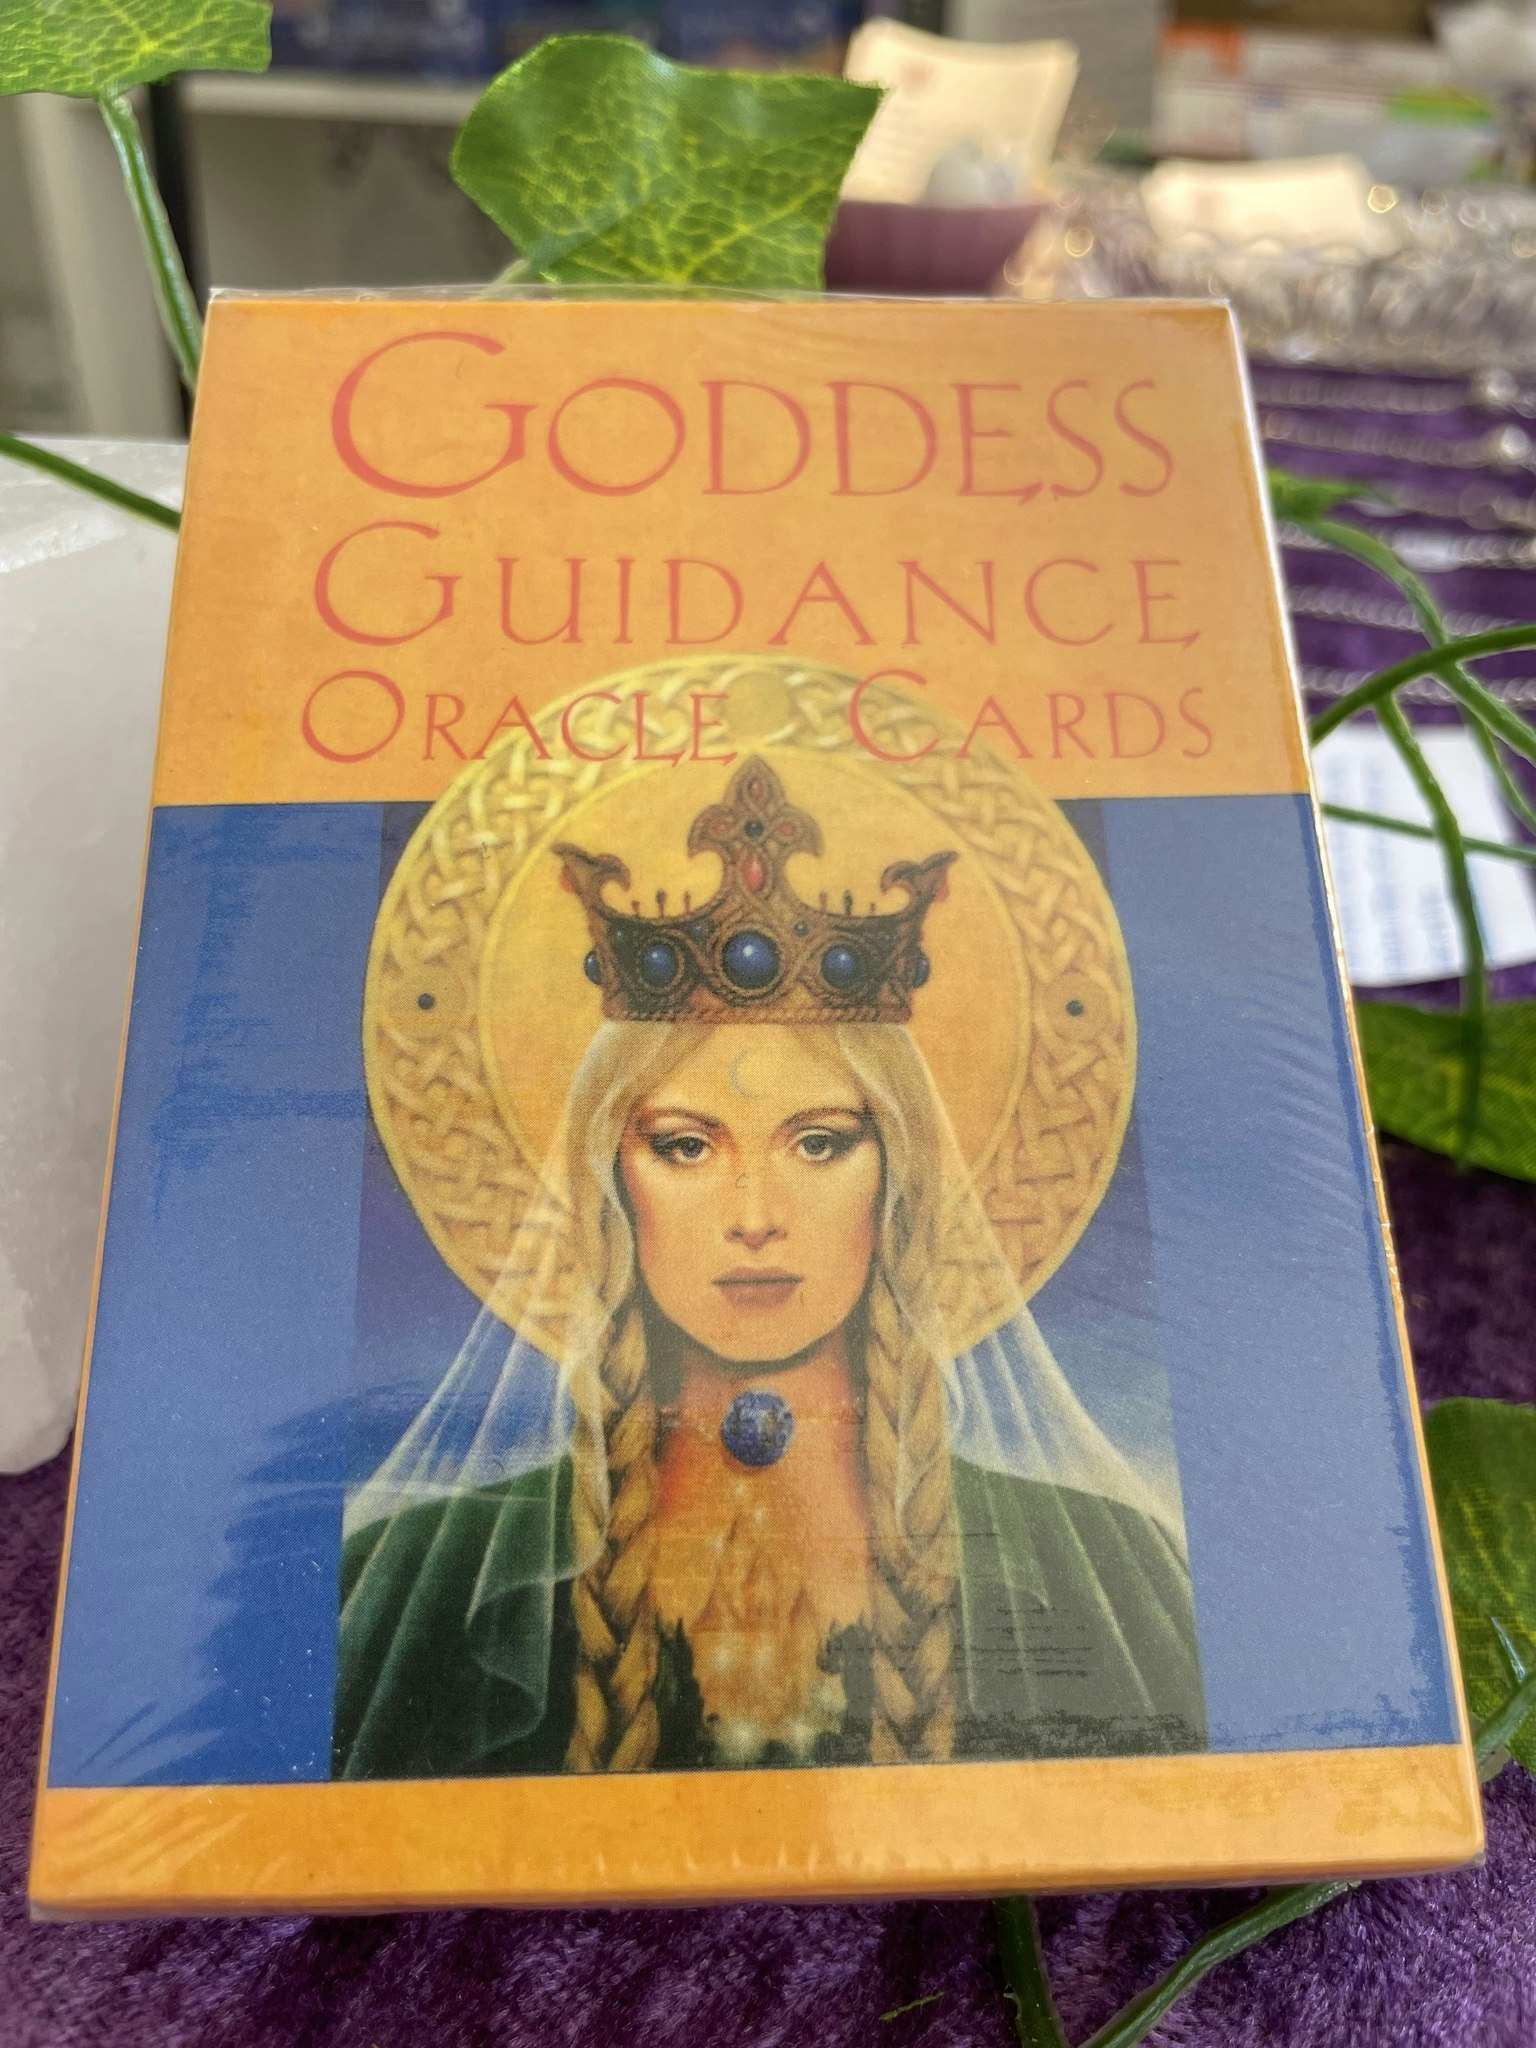 Goddess Guidance Oracle Cards